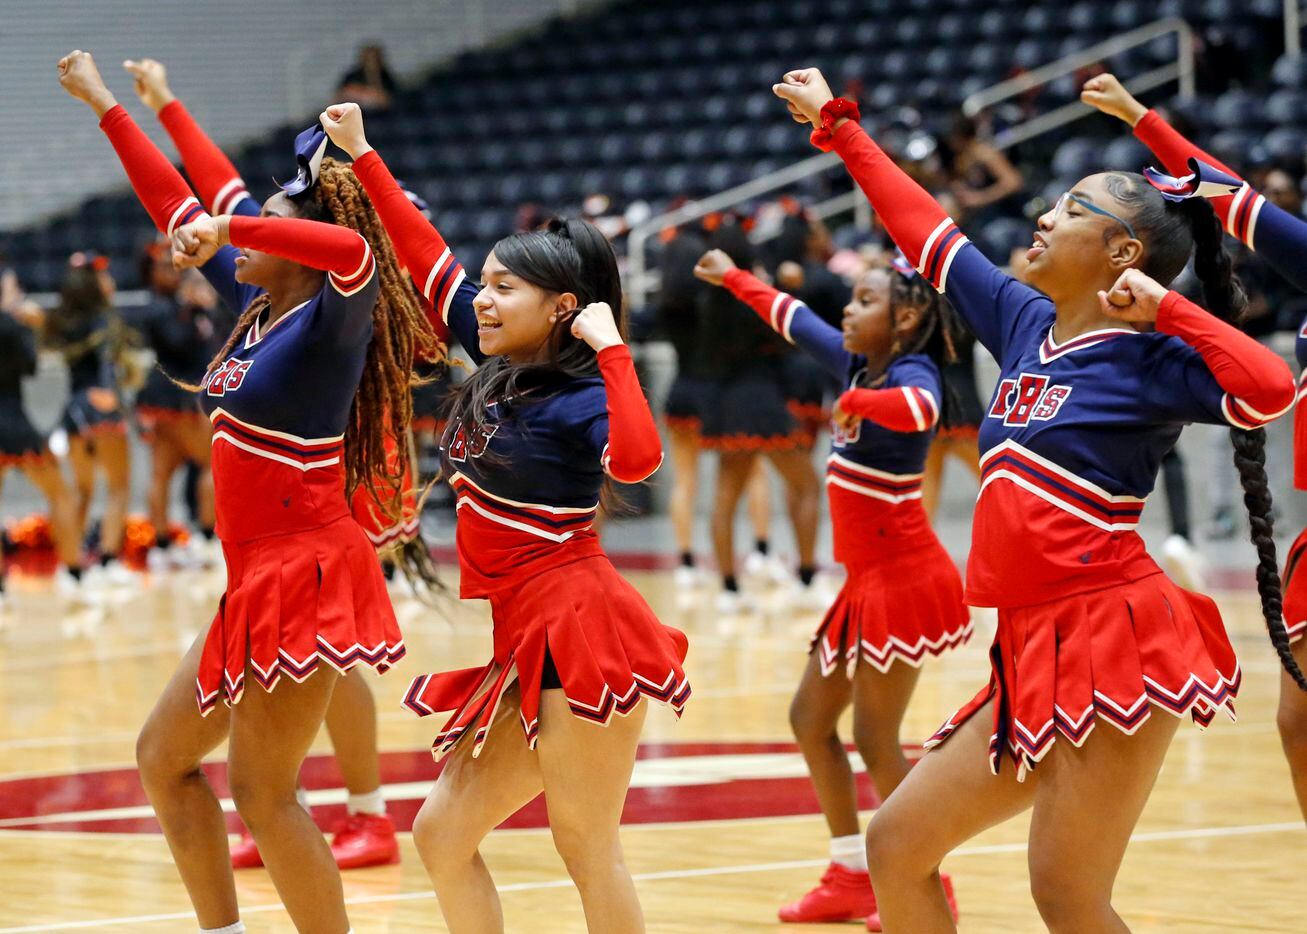 The Kimball cheerleaders perform a routine during the Class 5A State Boy’s Regional...